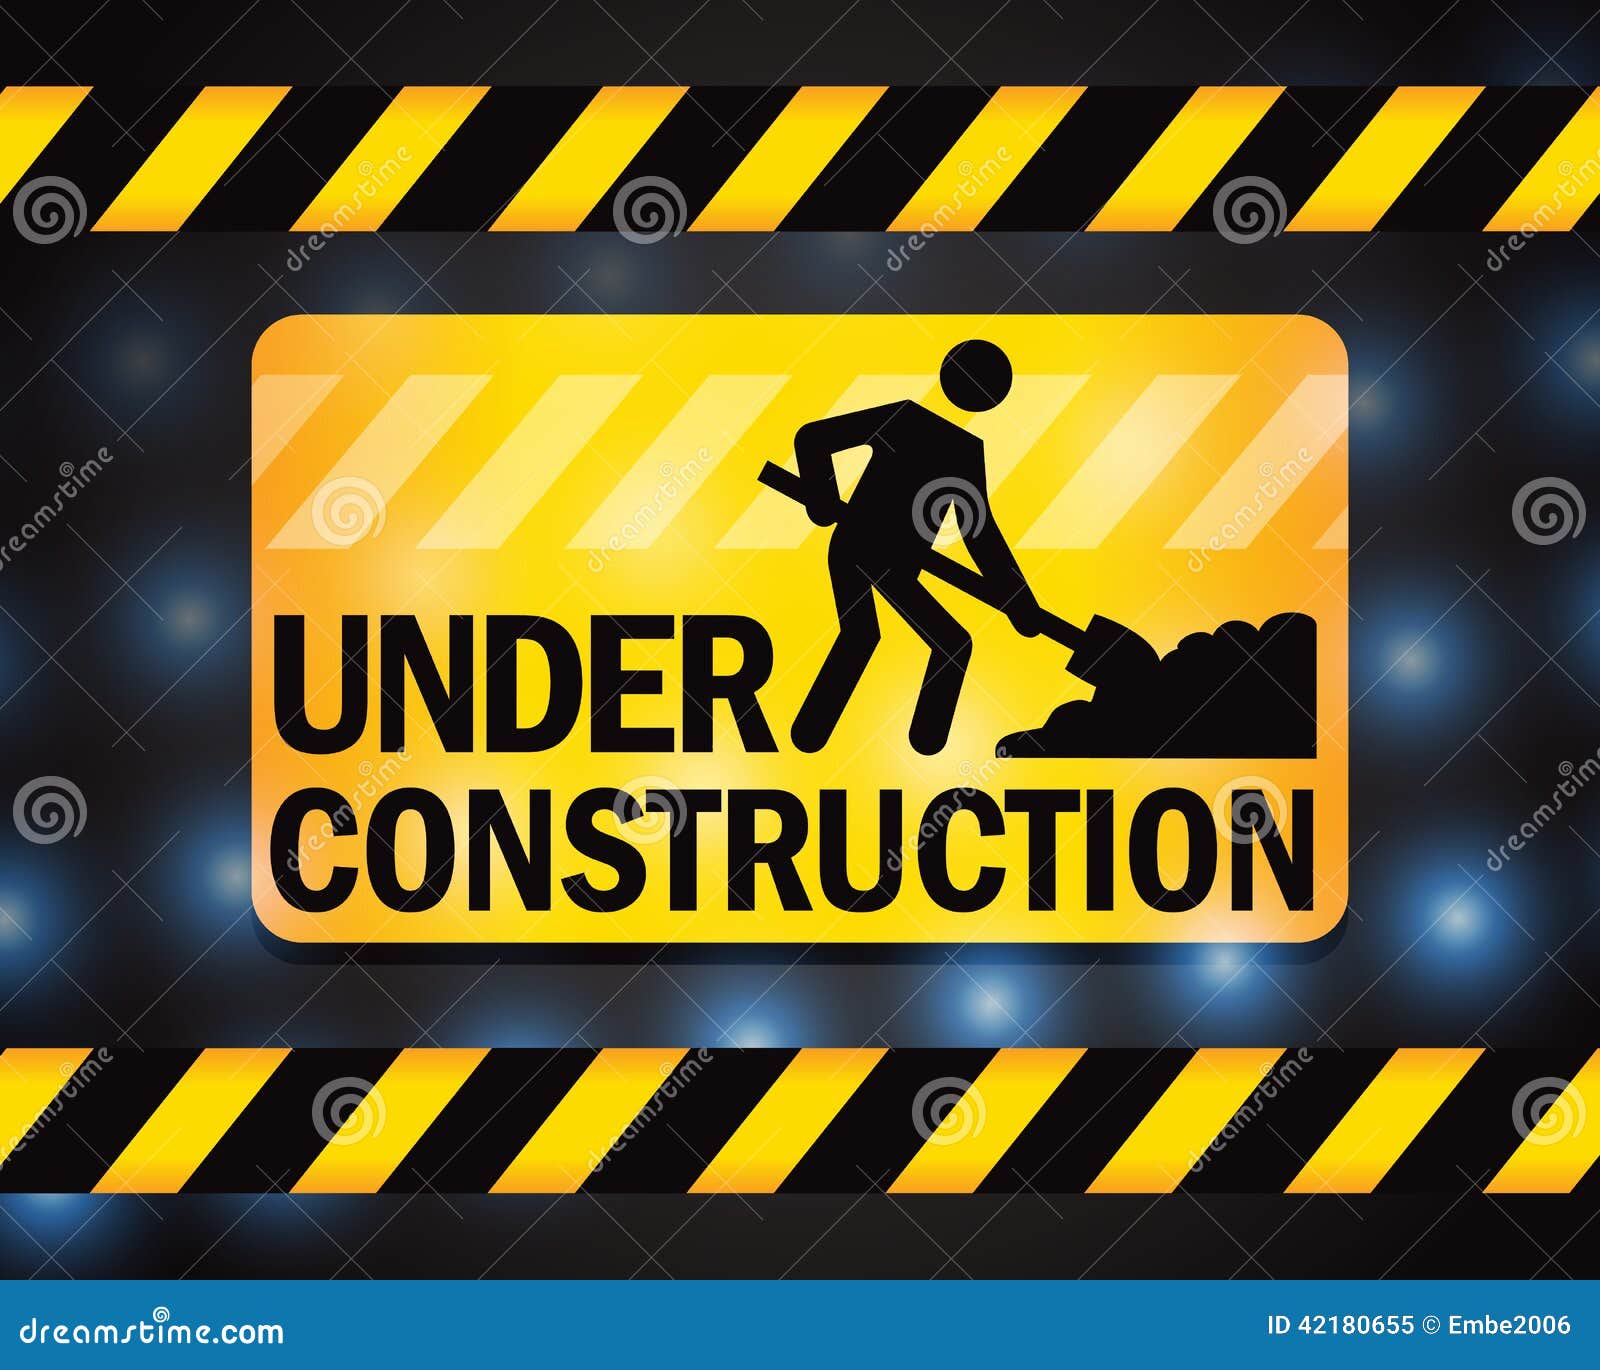 Under Construction stock vector. Illustration of page - 42180655